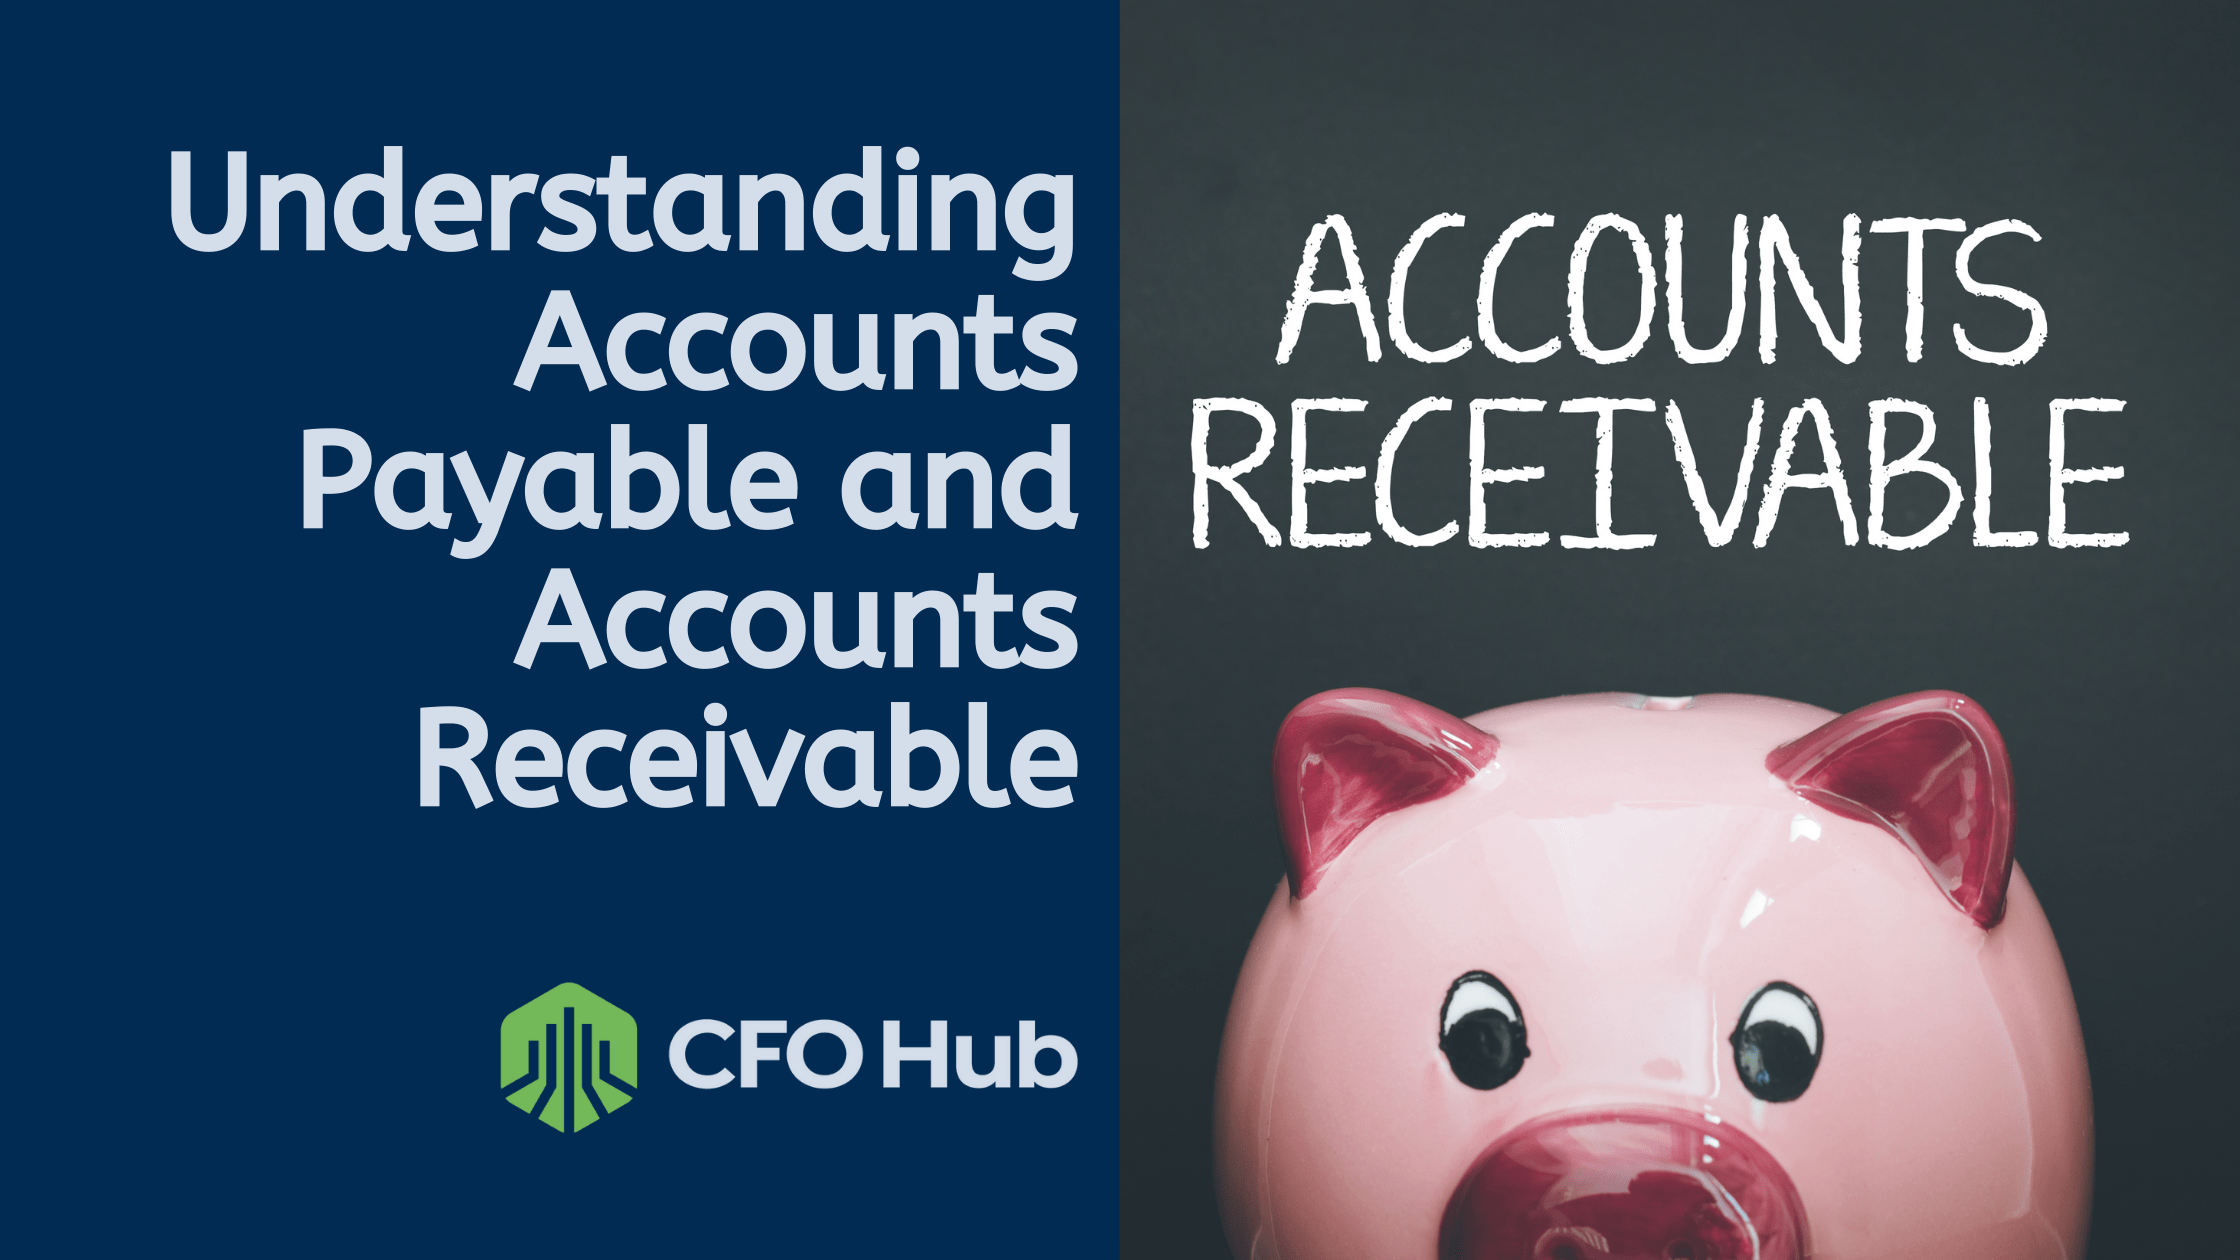 Understanding accounts payable and receivable